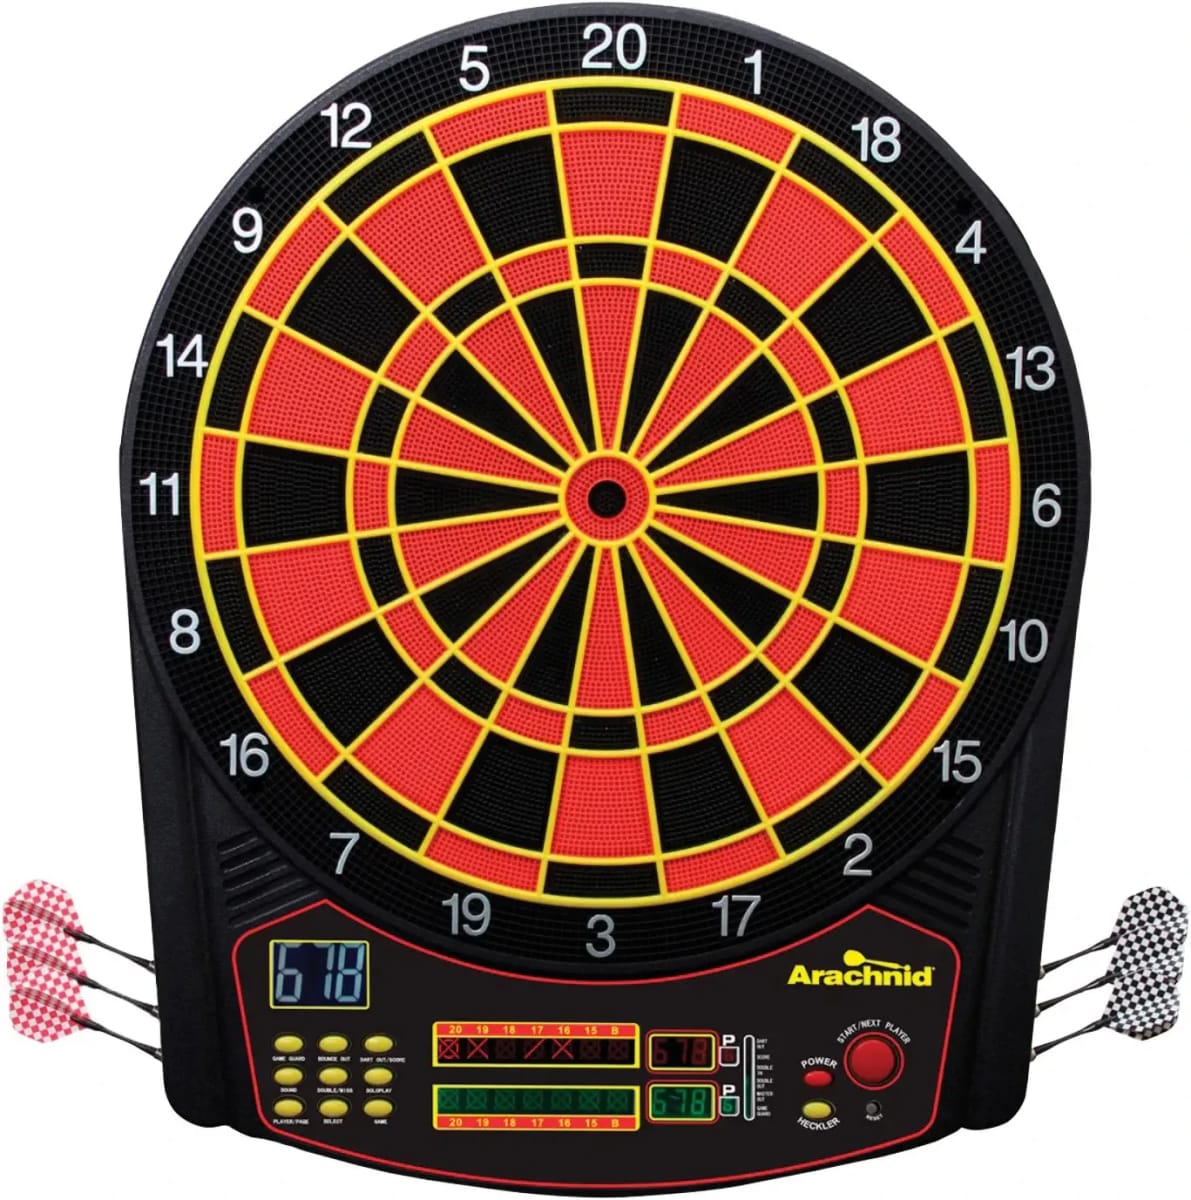 Cricket Pro 450 Electronic Dartboard Features 31 Games with 178 Variations and Includes Two Sets of Soft Tip Darts